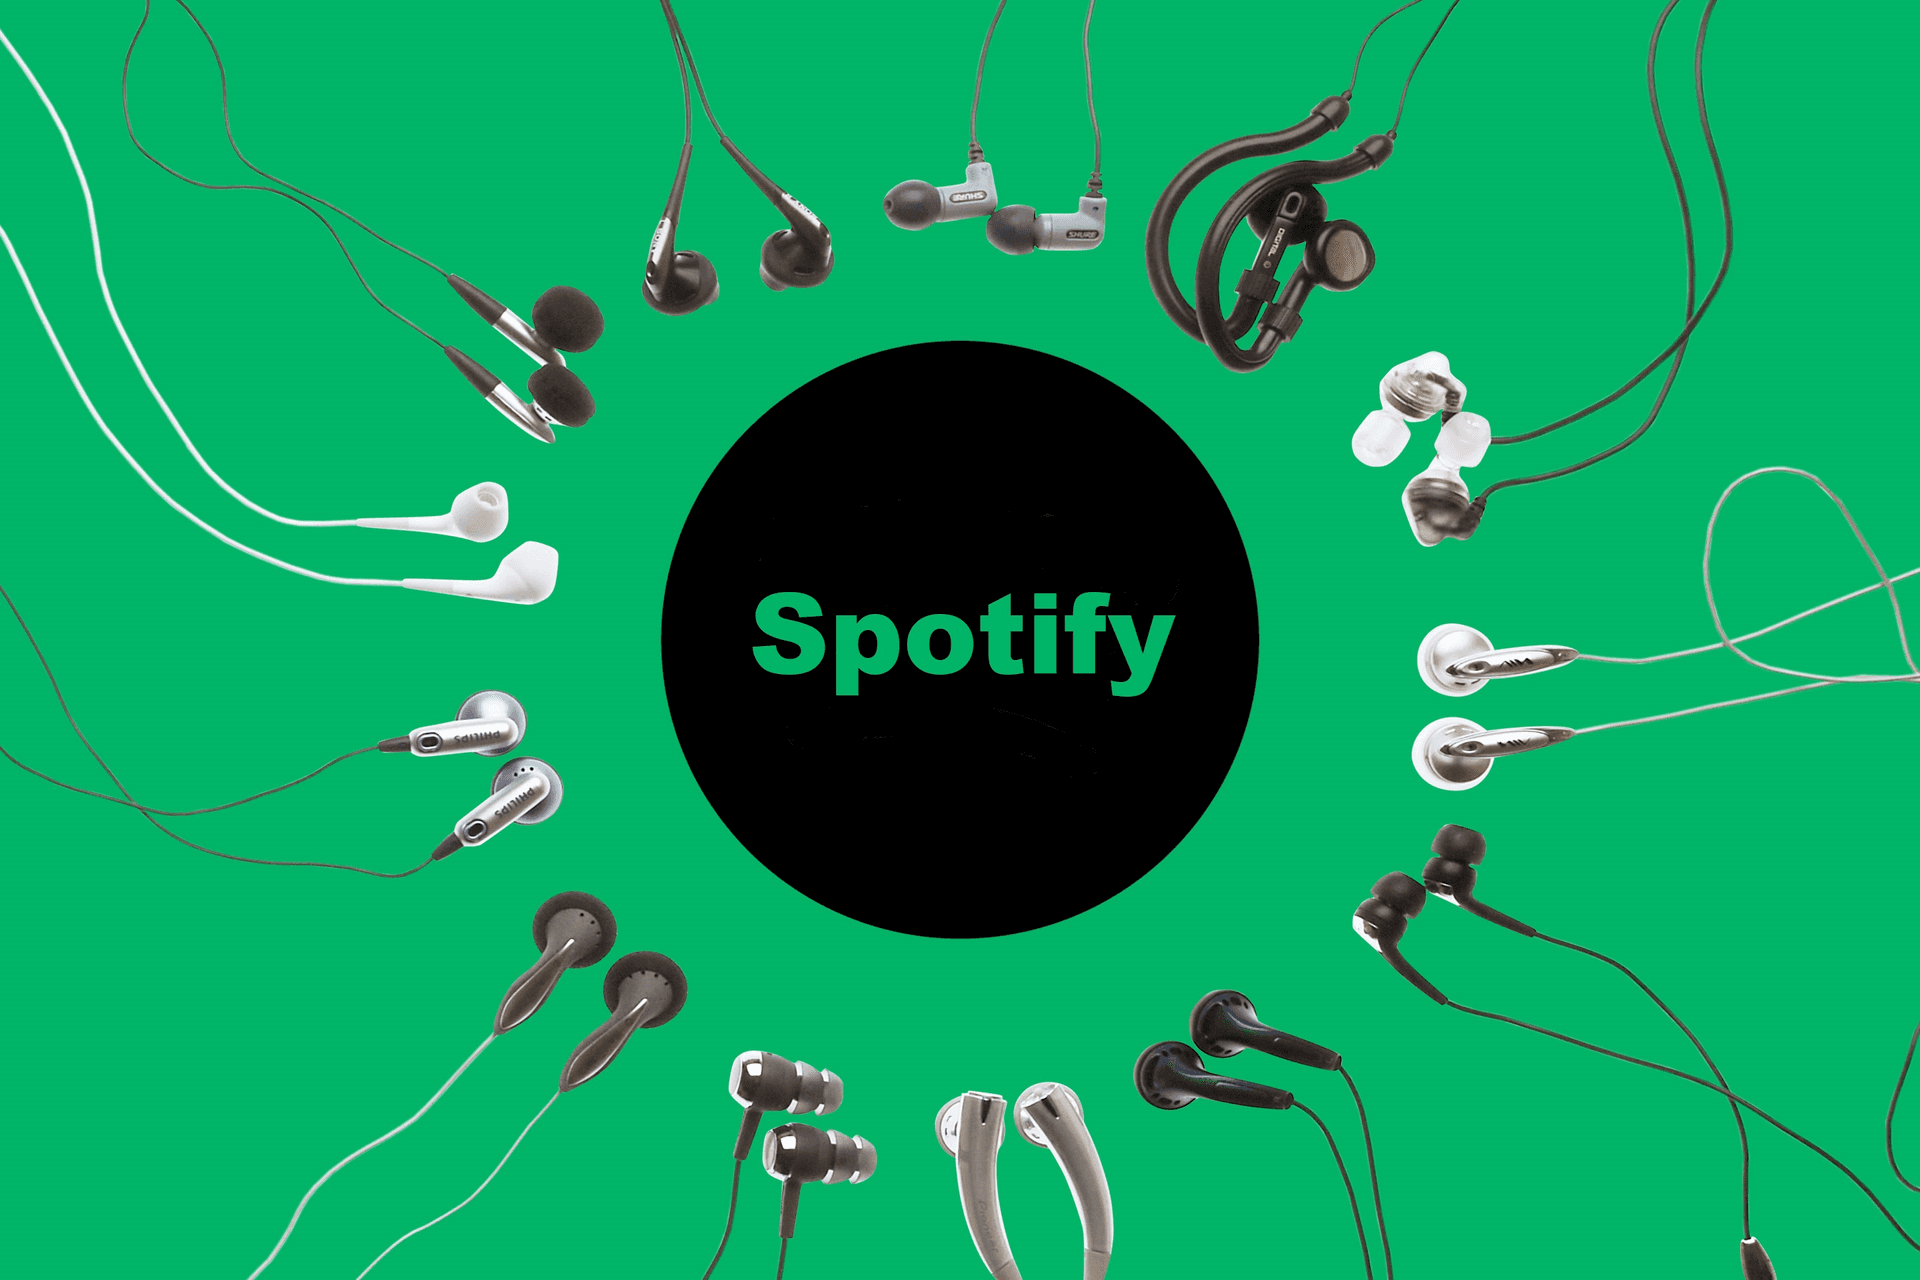 Download your Spotify songs for offline listening.